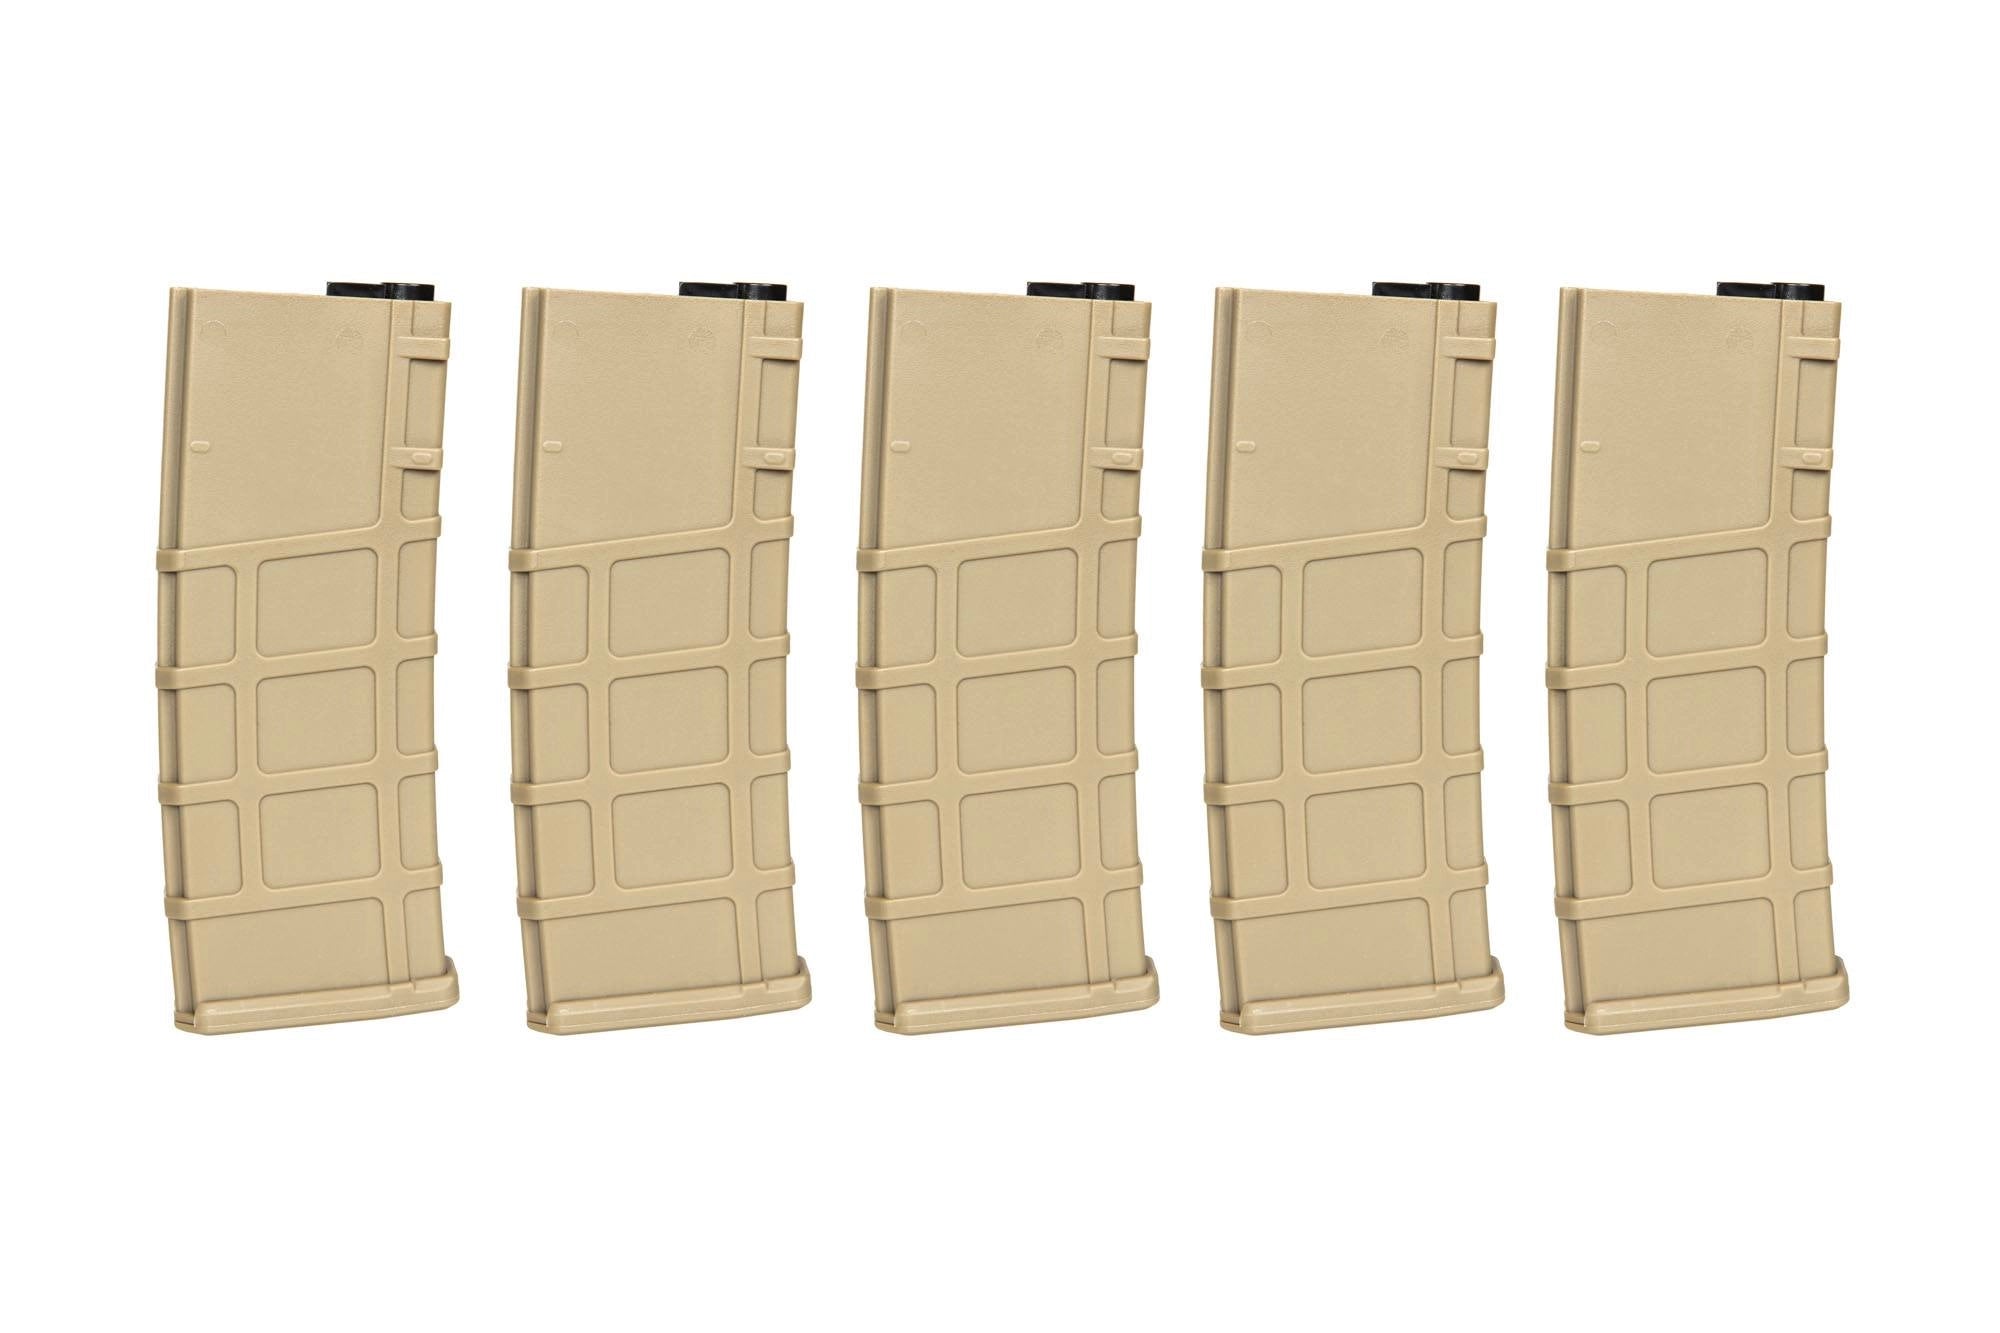 Set of 5 Polymer 200 BB's Mid-Cap magazines for M4/M16 replicas - Tan